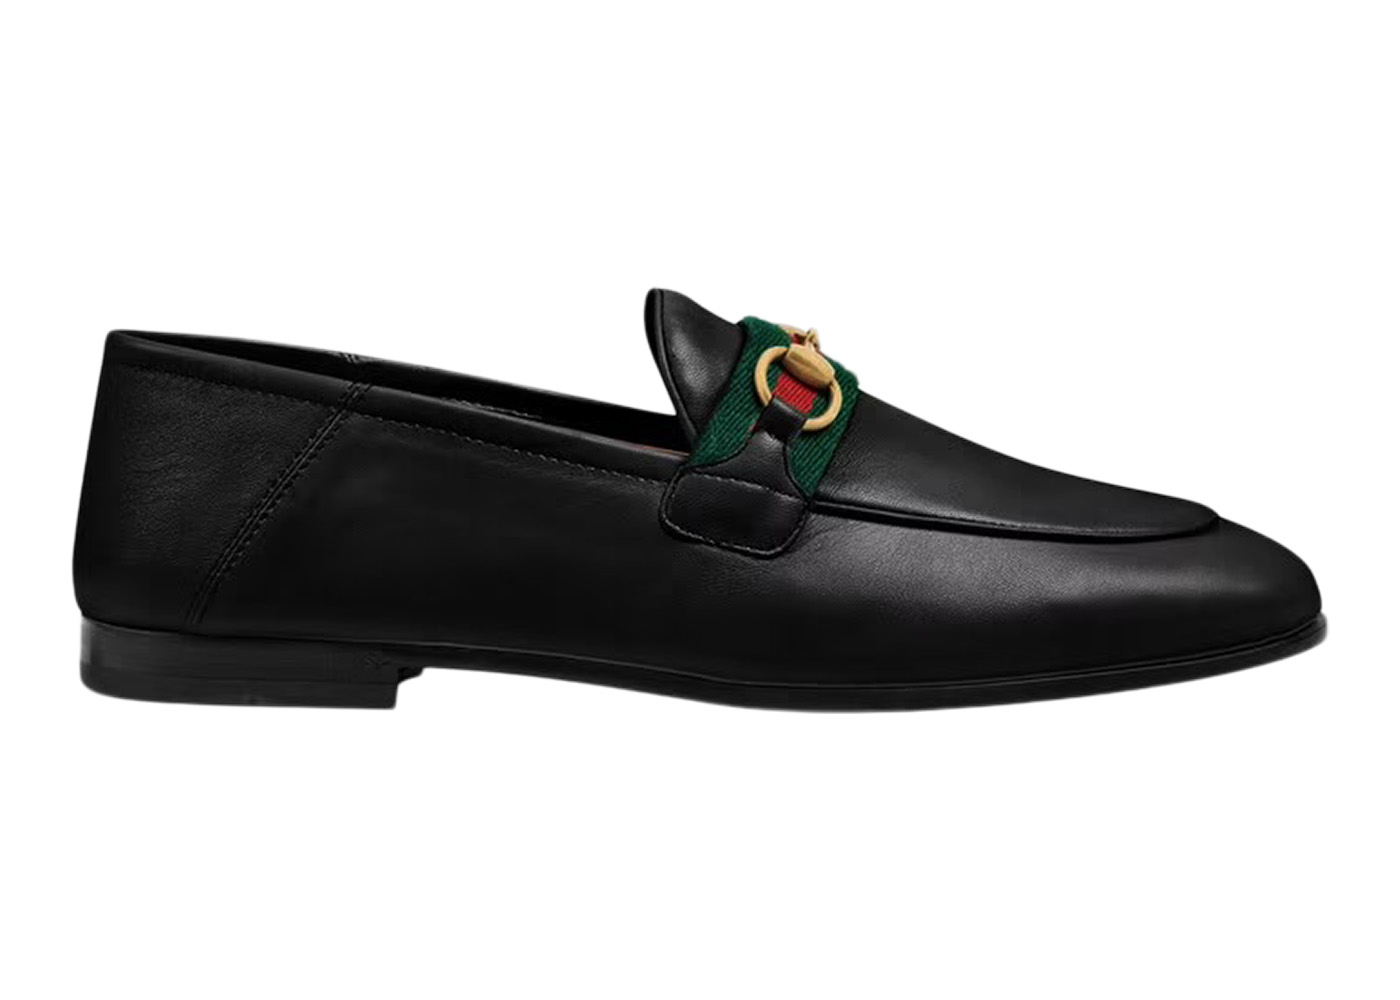 Gucci Slip On Loafer with Web Black Leather - _631619 CQXM0 1060 - US